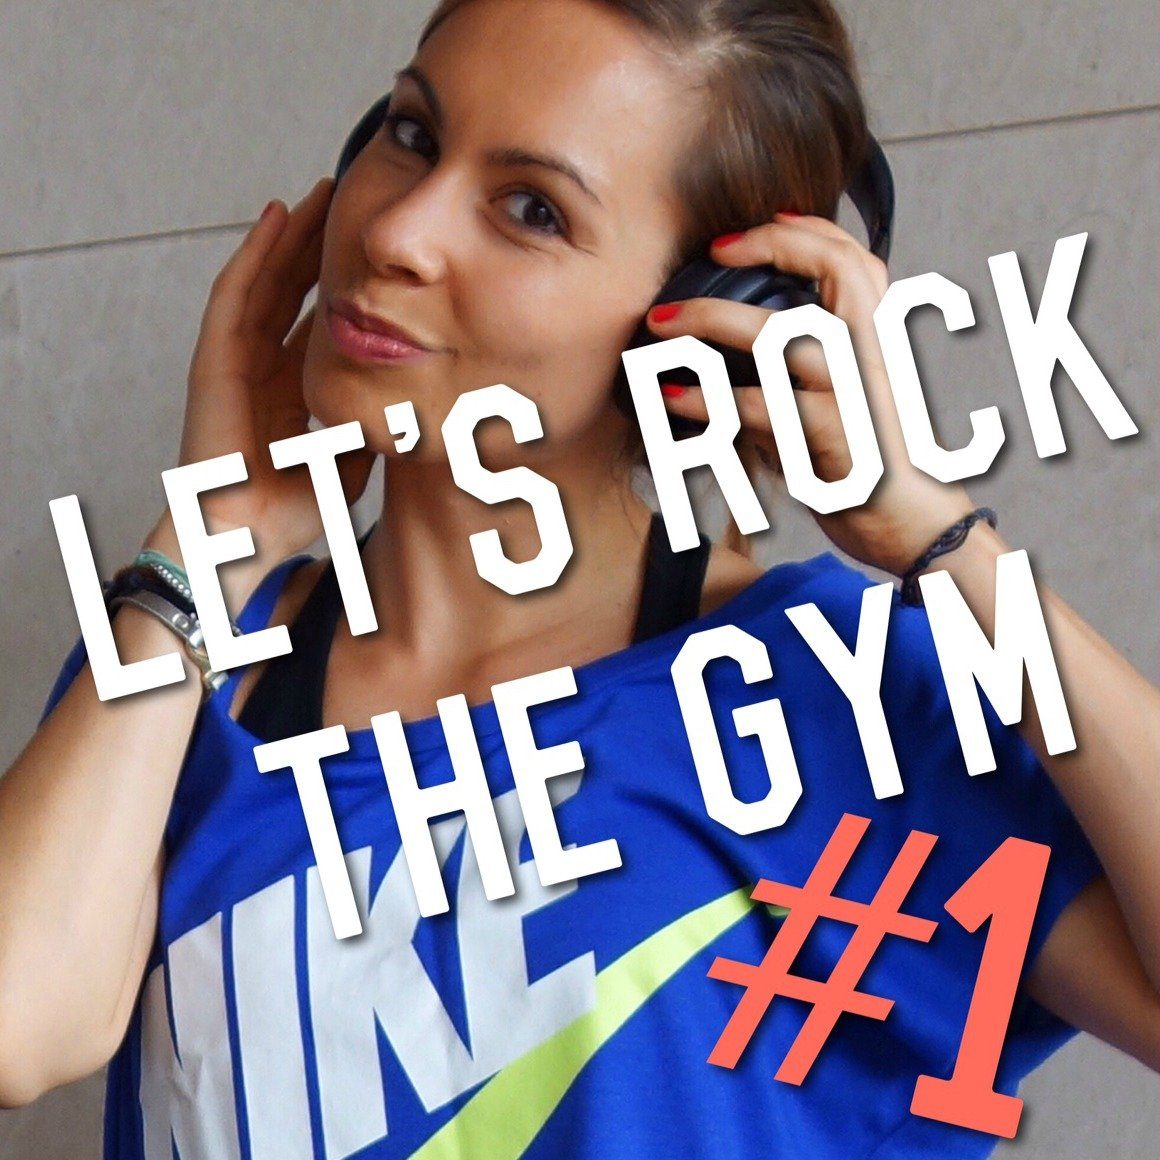 Lets rock the gym #1